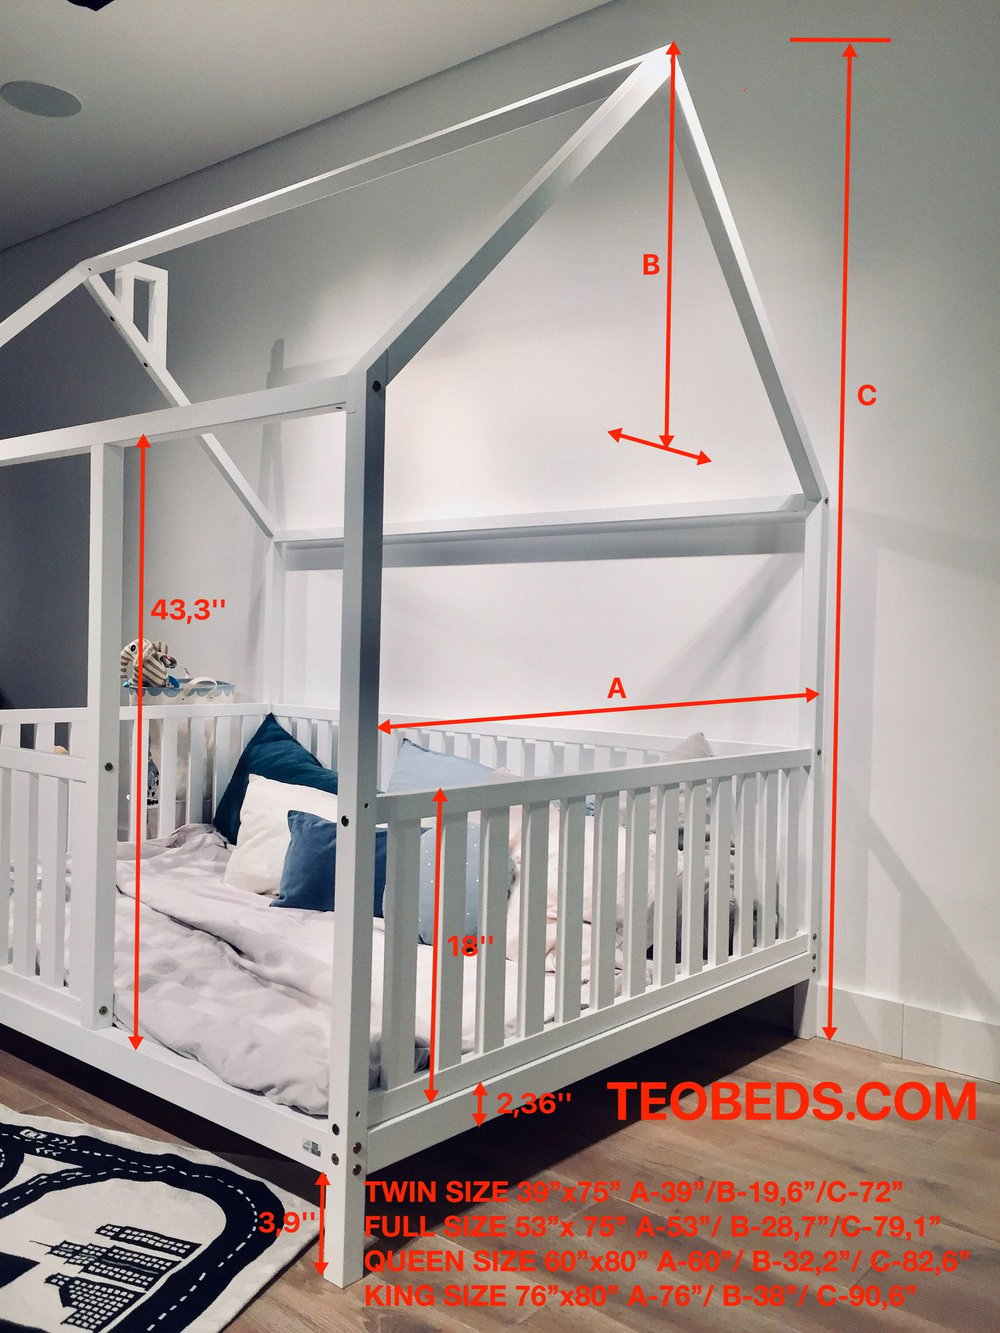 KING Size 76x80" kids' bed with bed rails Teo Beds' FREE SHIPPING